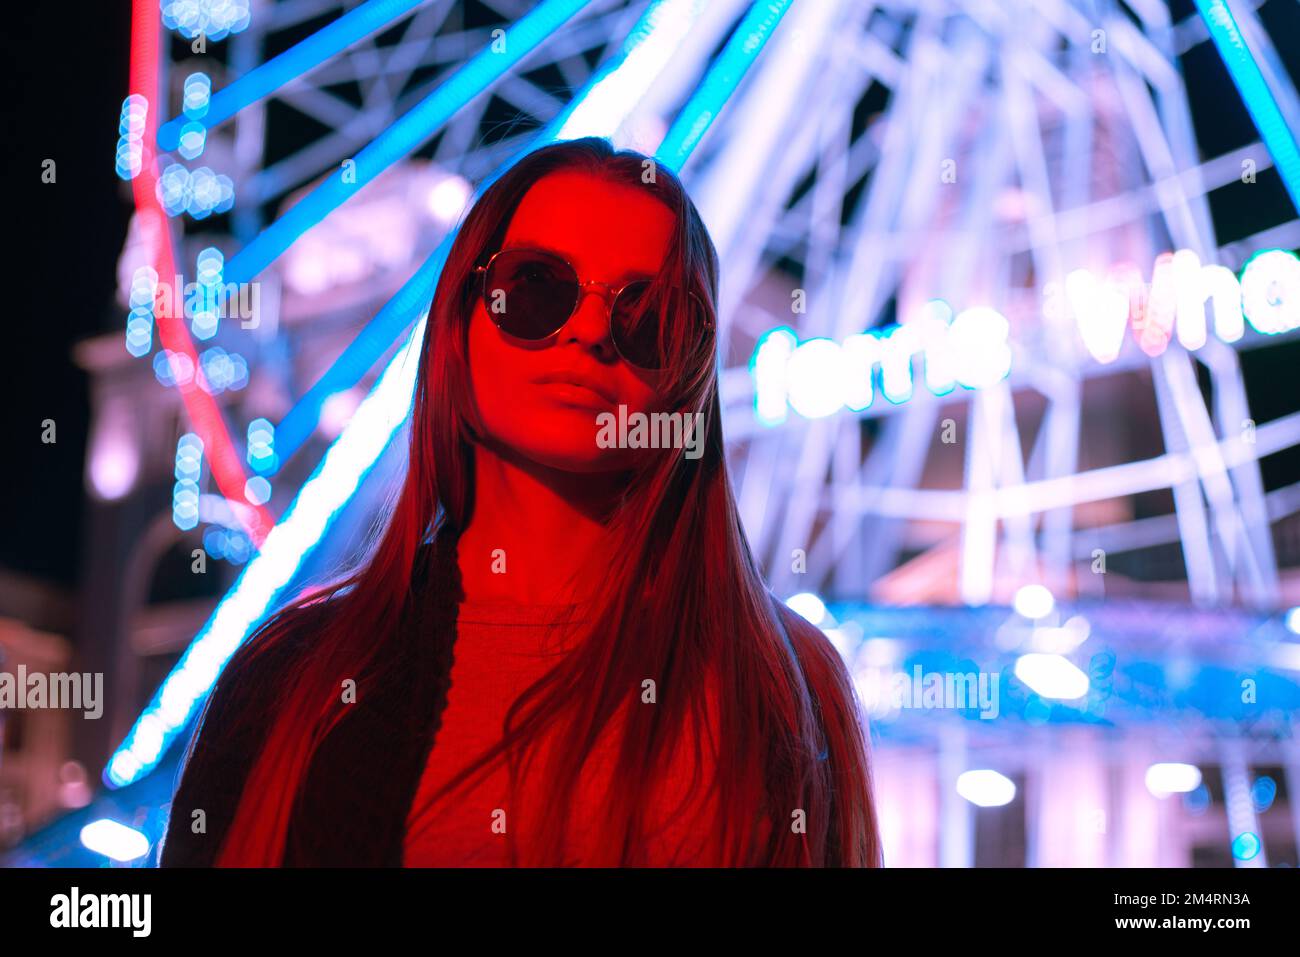 Portrait a pretty tourist urban young woman in sunglasses standing In front of a Ferris wheel in a red neon light-colored background Stock Photo